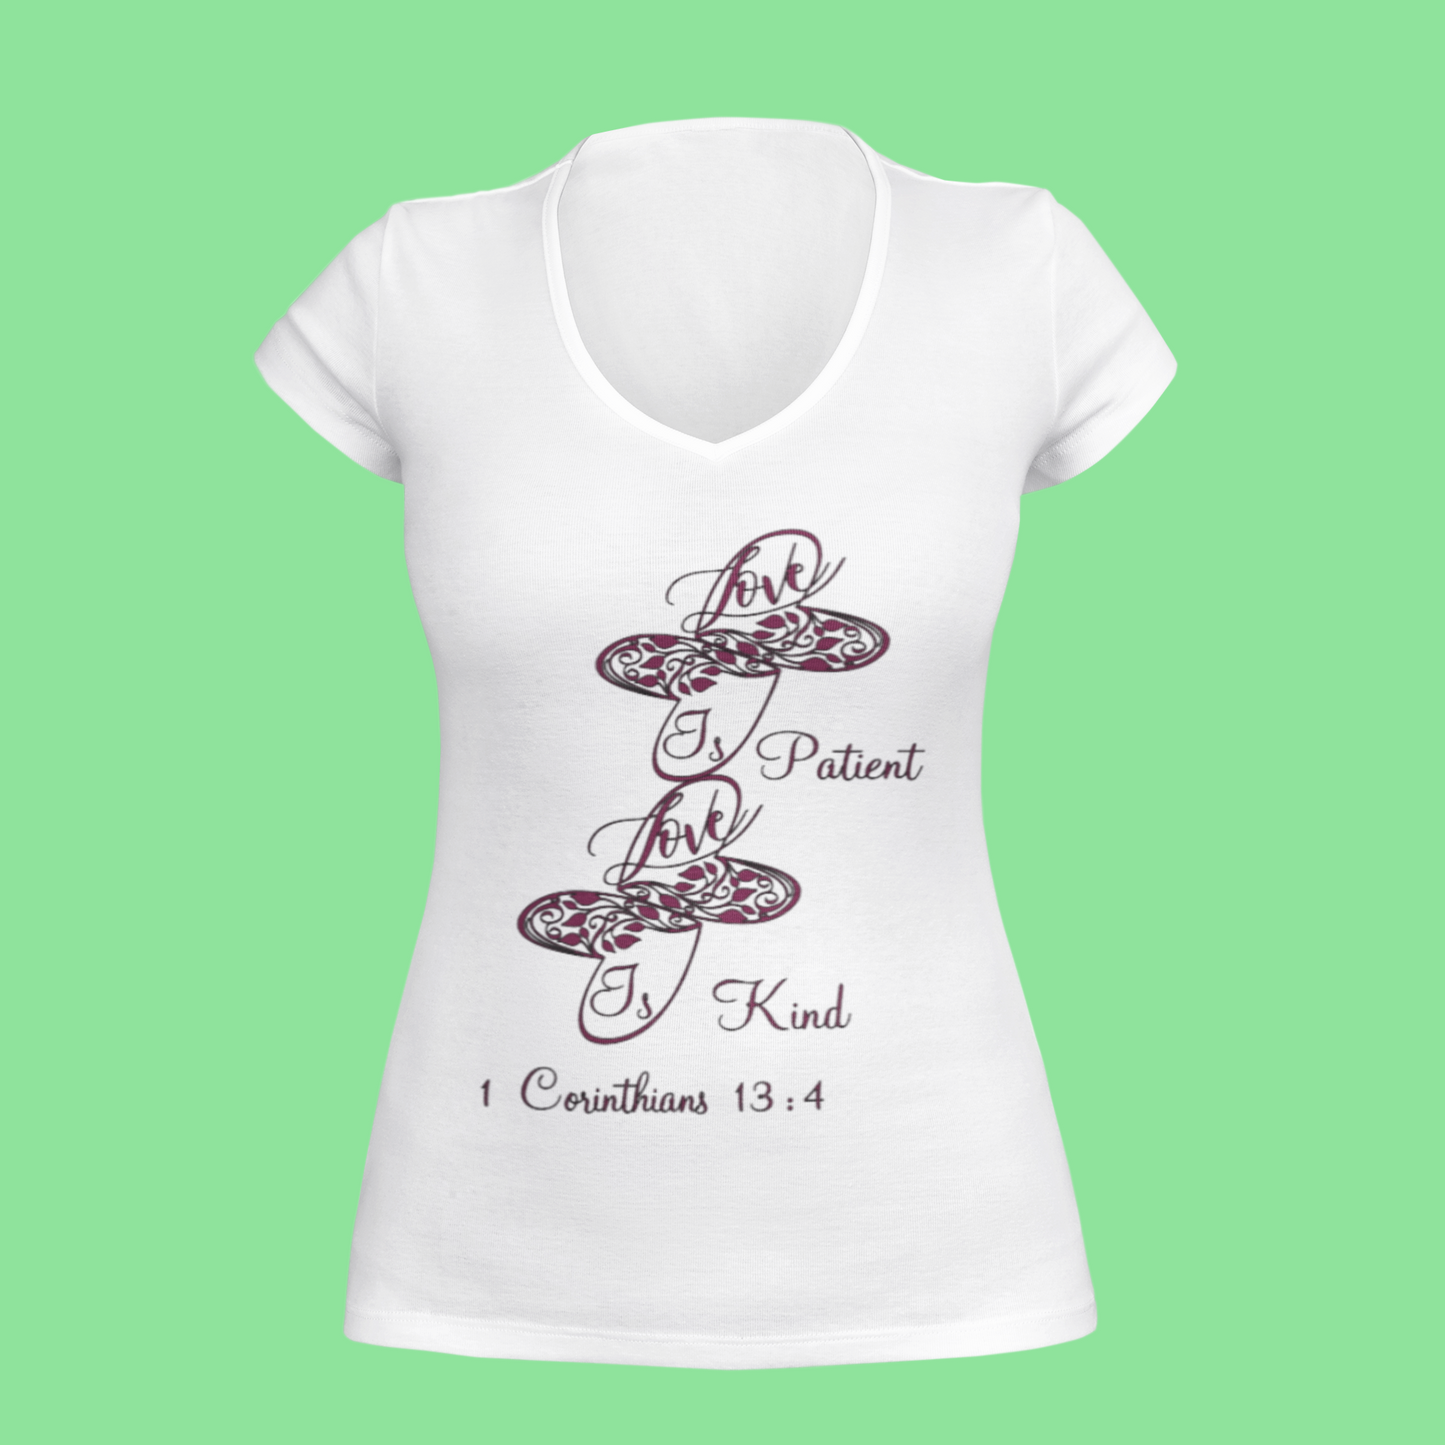 God's Love Collection Women's Scoop Neck T-Shirt 1 Corthin 13:4 Option 2